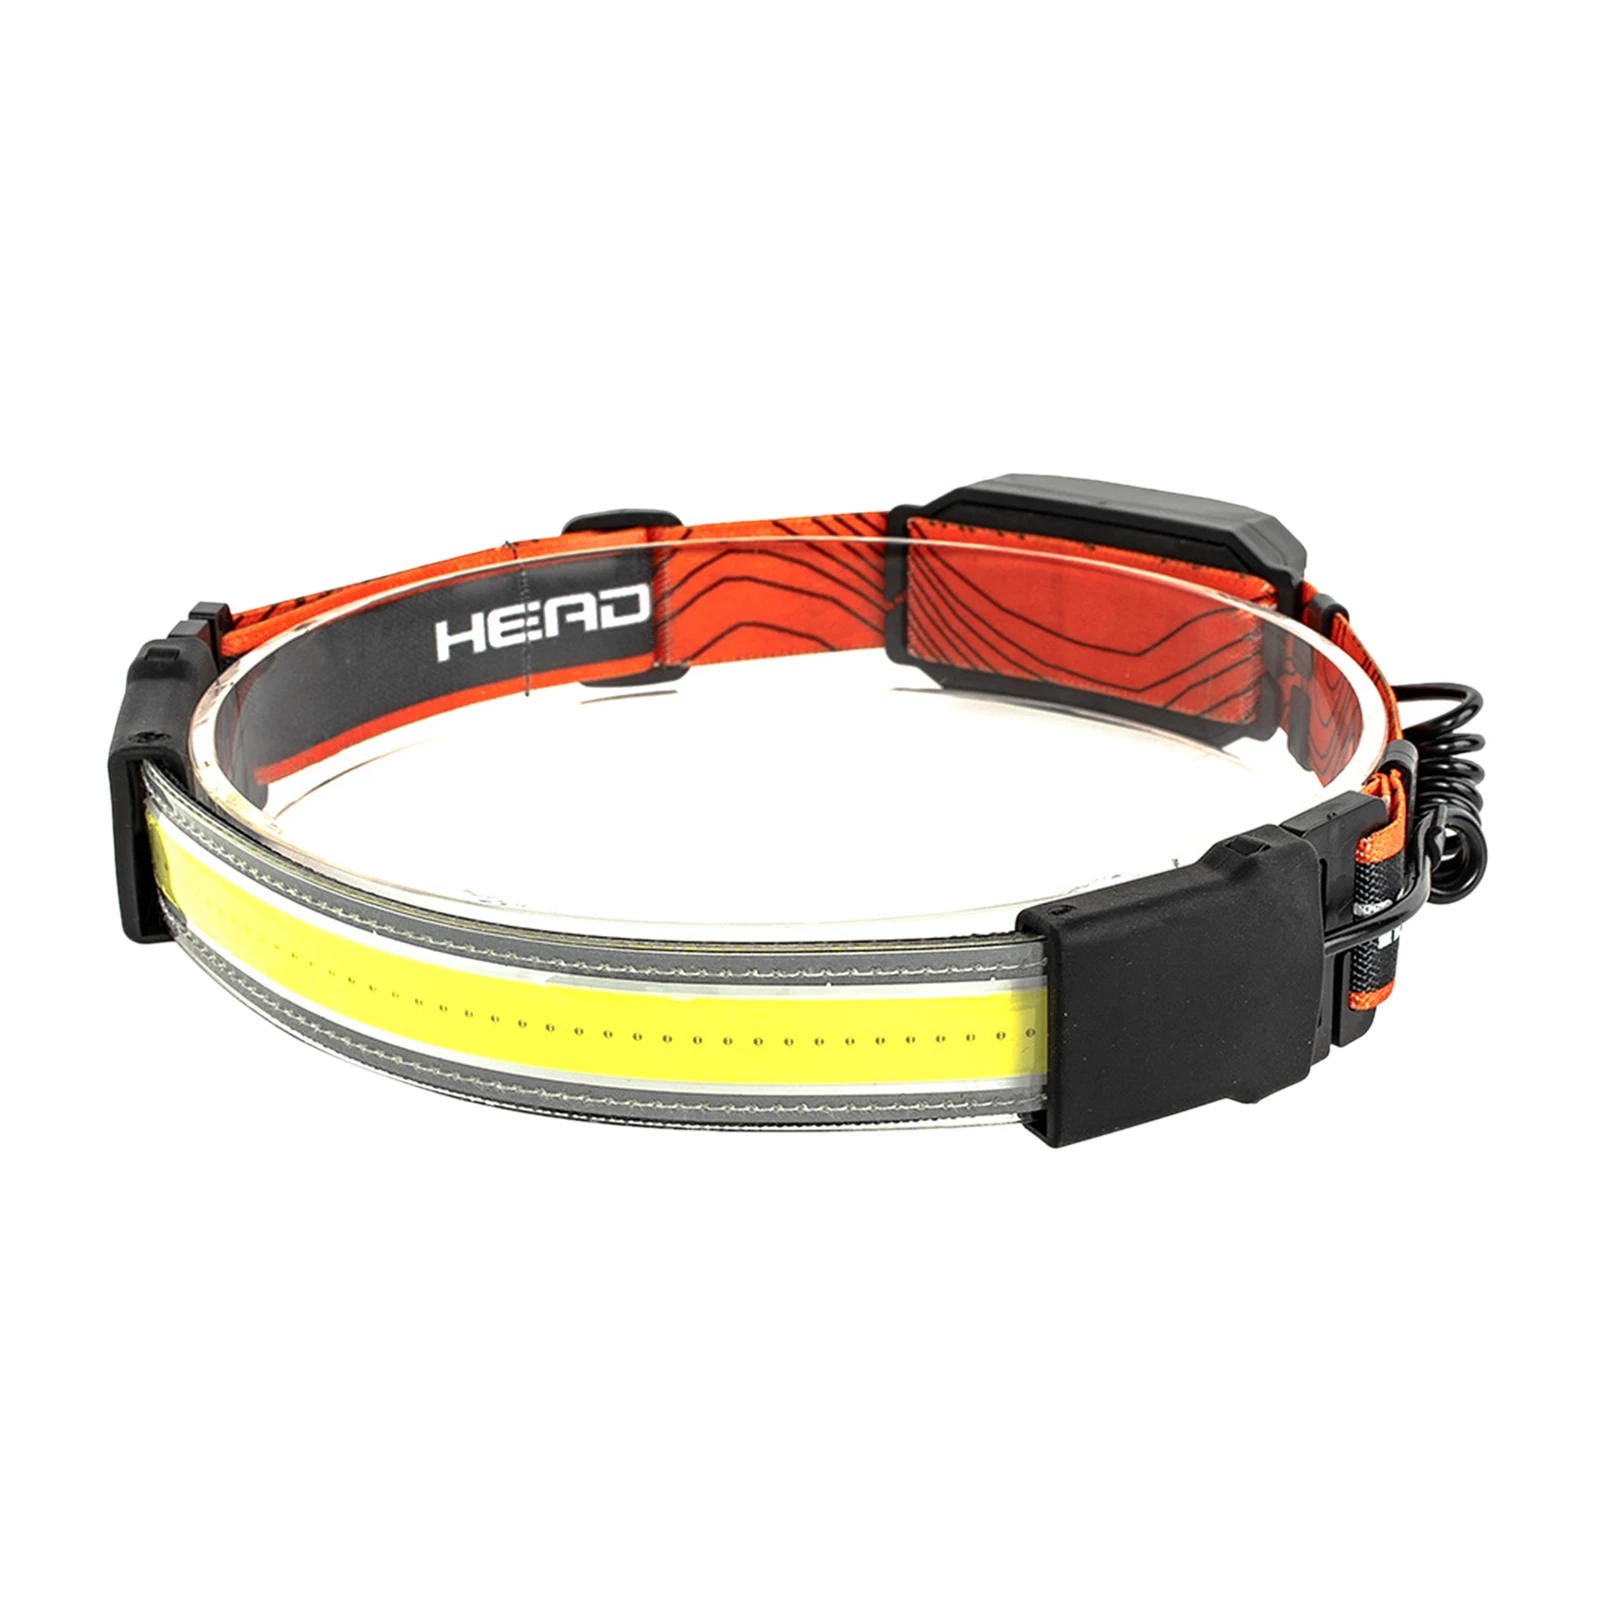 aCOB+LED Led Headlamp With Red Warning Light Built-in Battery Rechargeable Portable Headlight Strong Light Head Torch